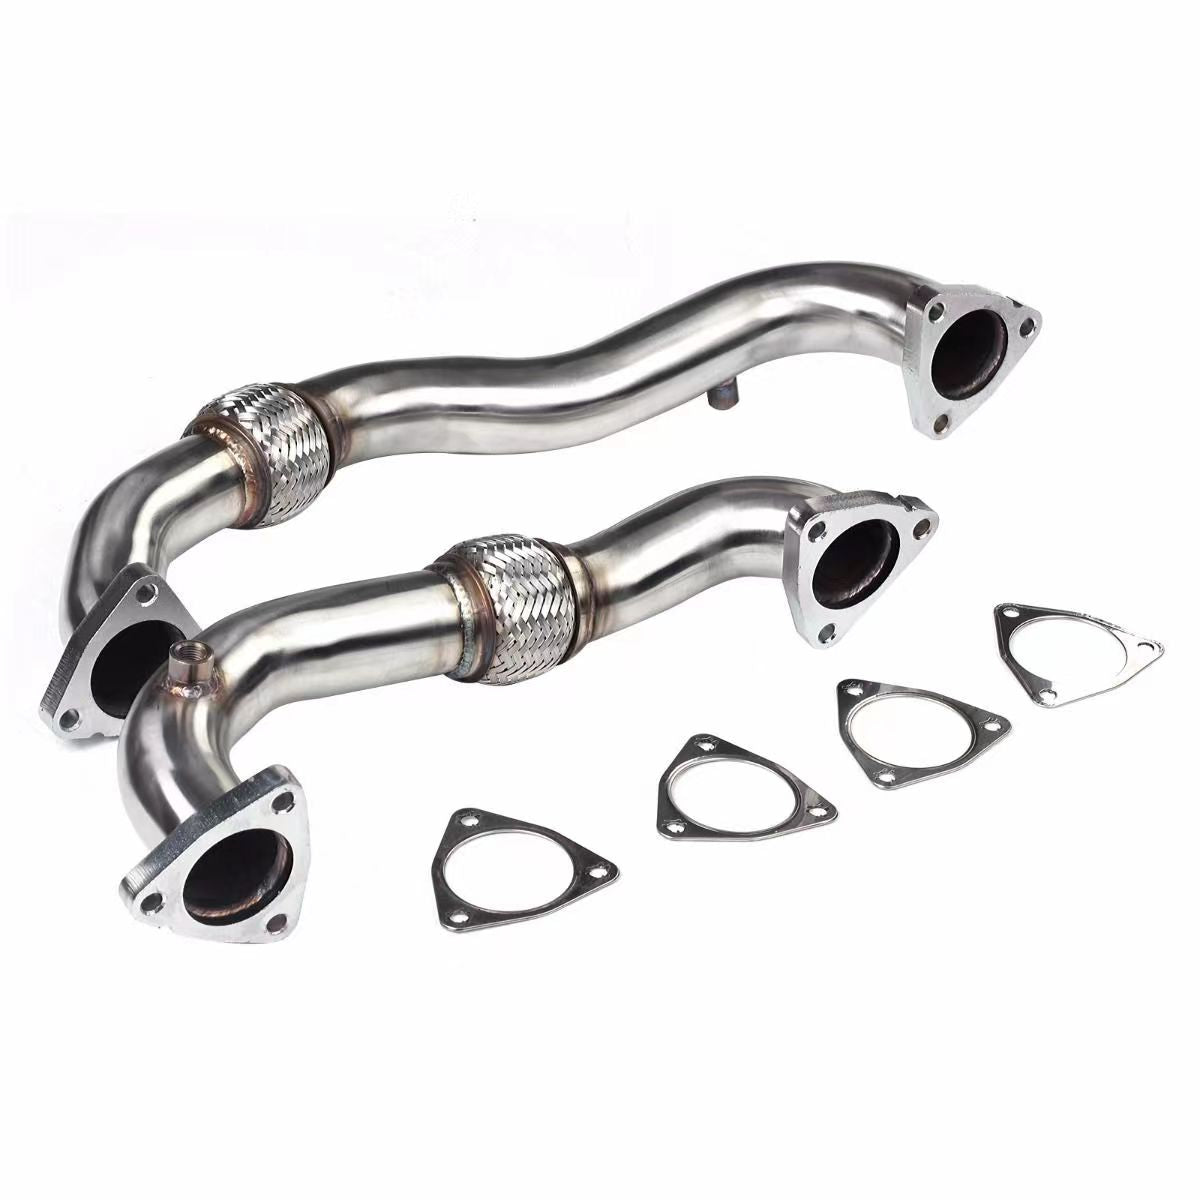 Exhaust Downpipe For 2008-2010 Ford F250 F350 F450 F550 Heavy Duty 6.4L